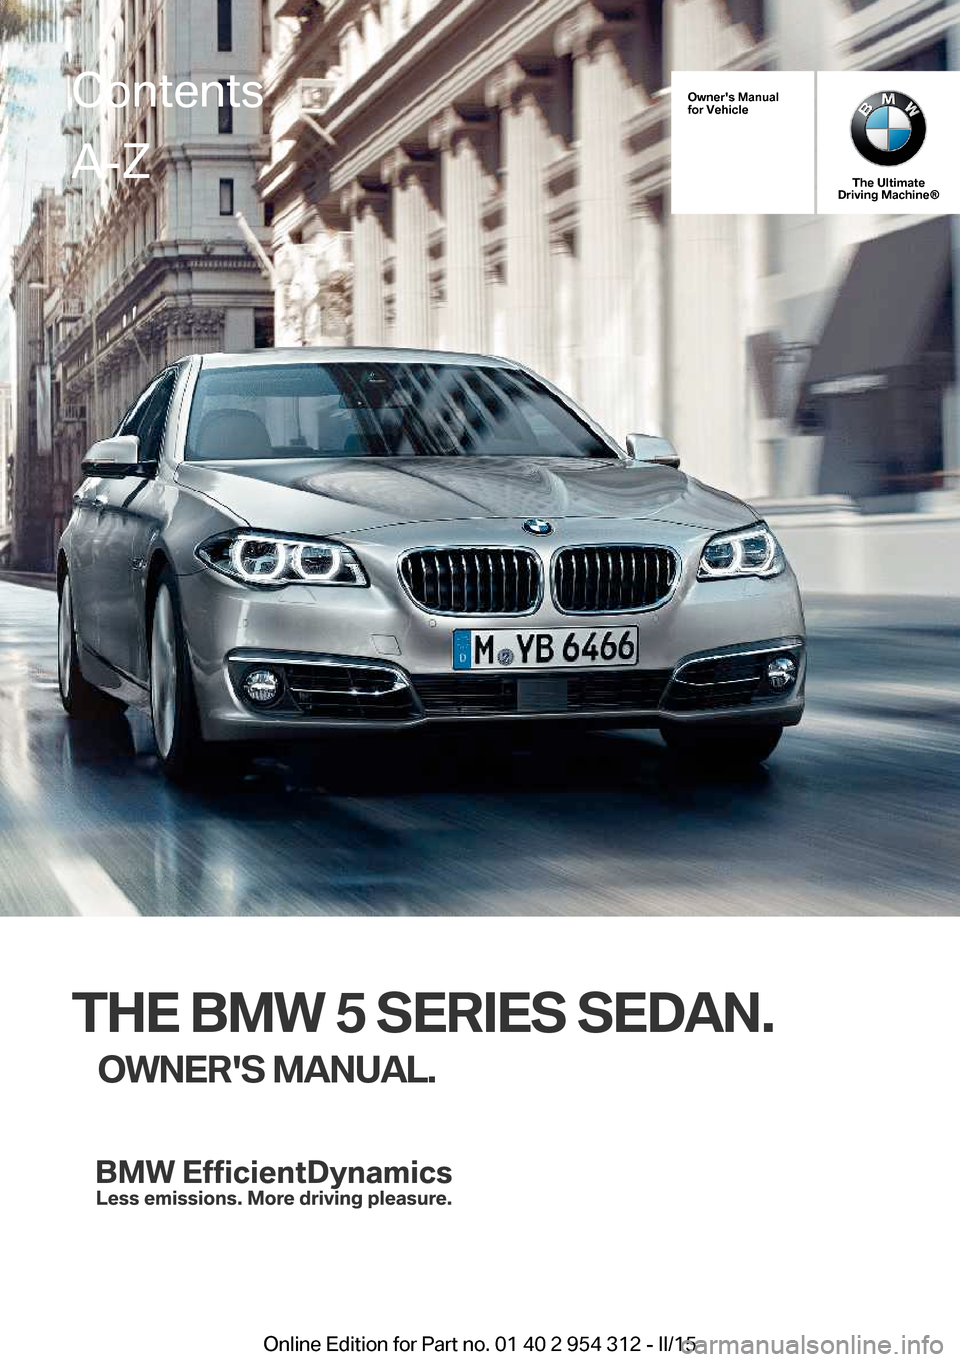 BMW 5 SERIES SEDAN 2016 F70 Owners Manual Owners Manual
for Vehicle
The Ultimate
Driving Machine®
THE BMW 5 SERIES SEDAN.
OWNERS MANUAL.
ContentsA-Z
Online Edition for Part no. 01 40 2 954 312 - II/15   